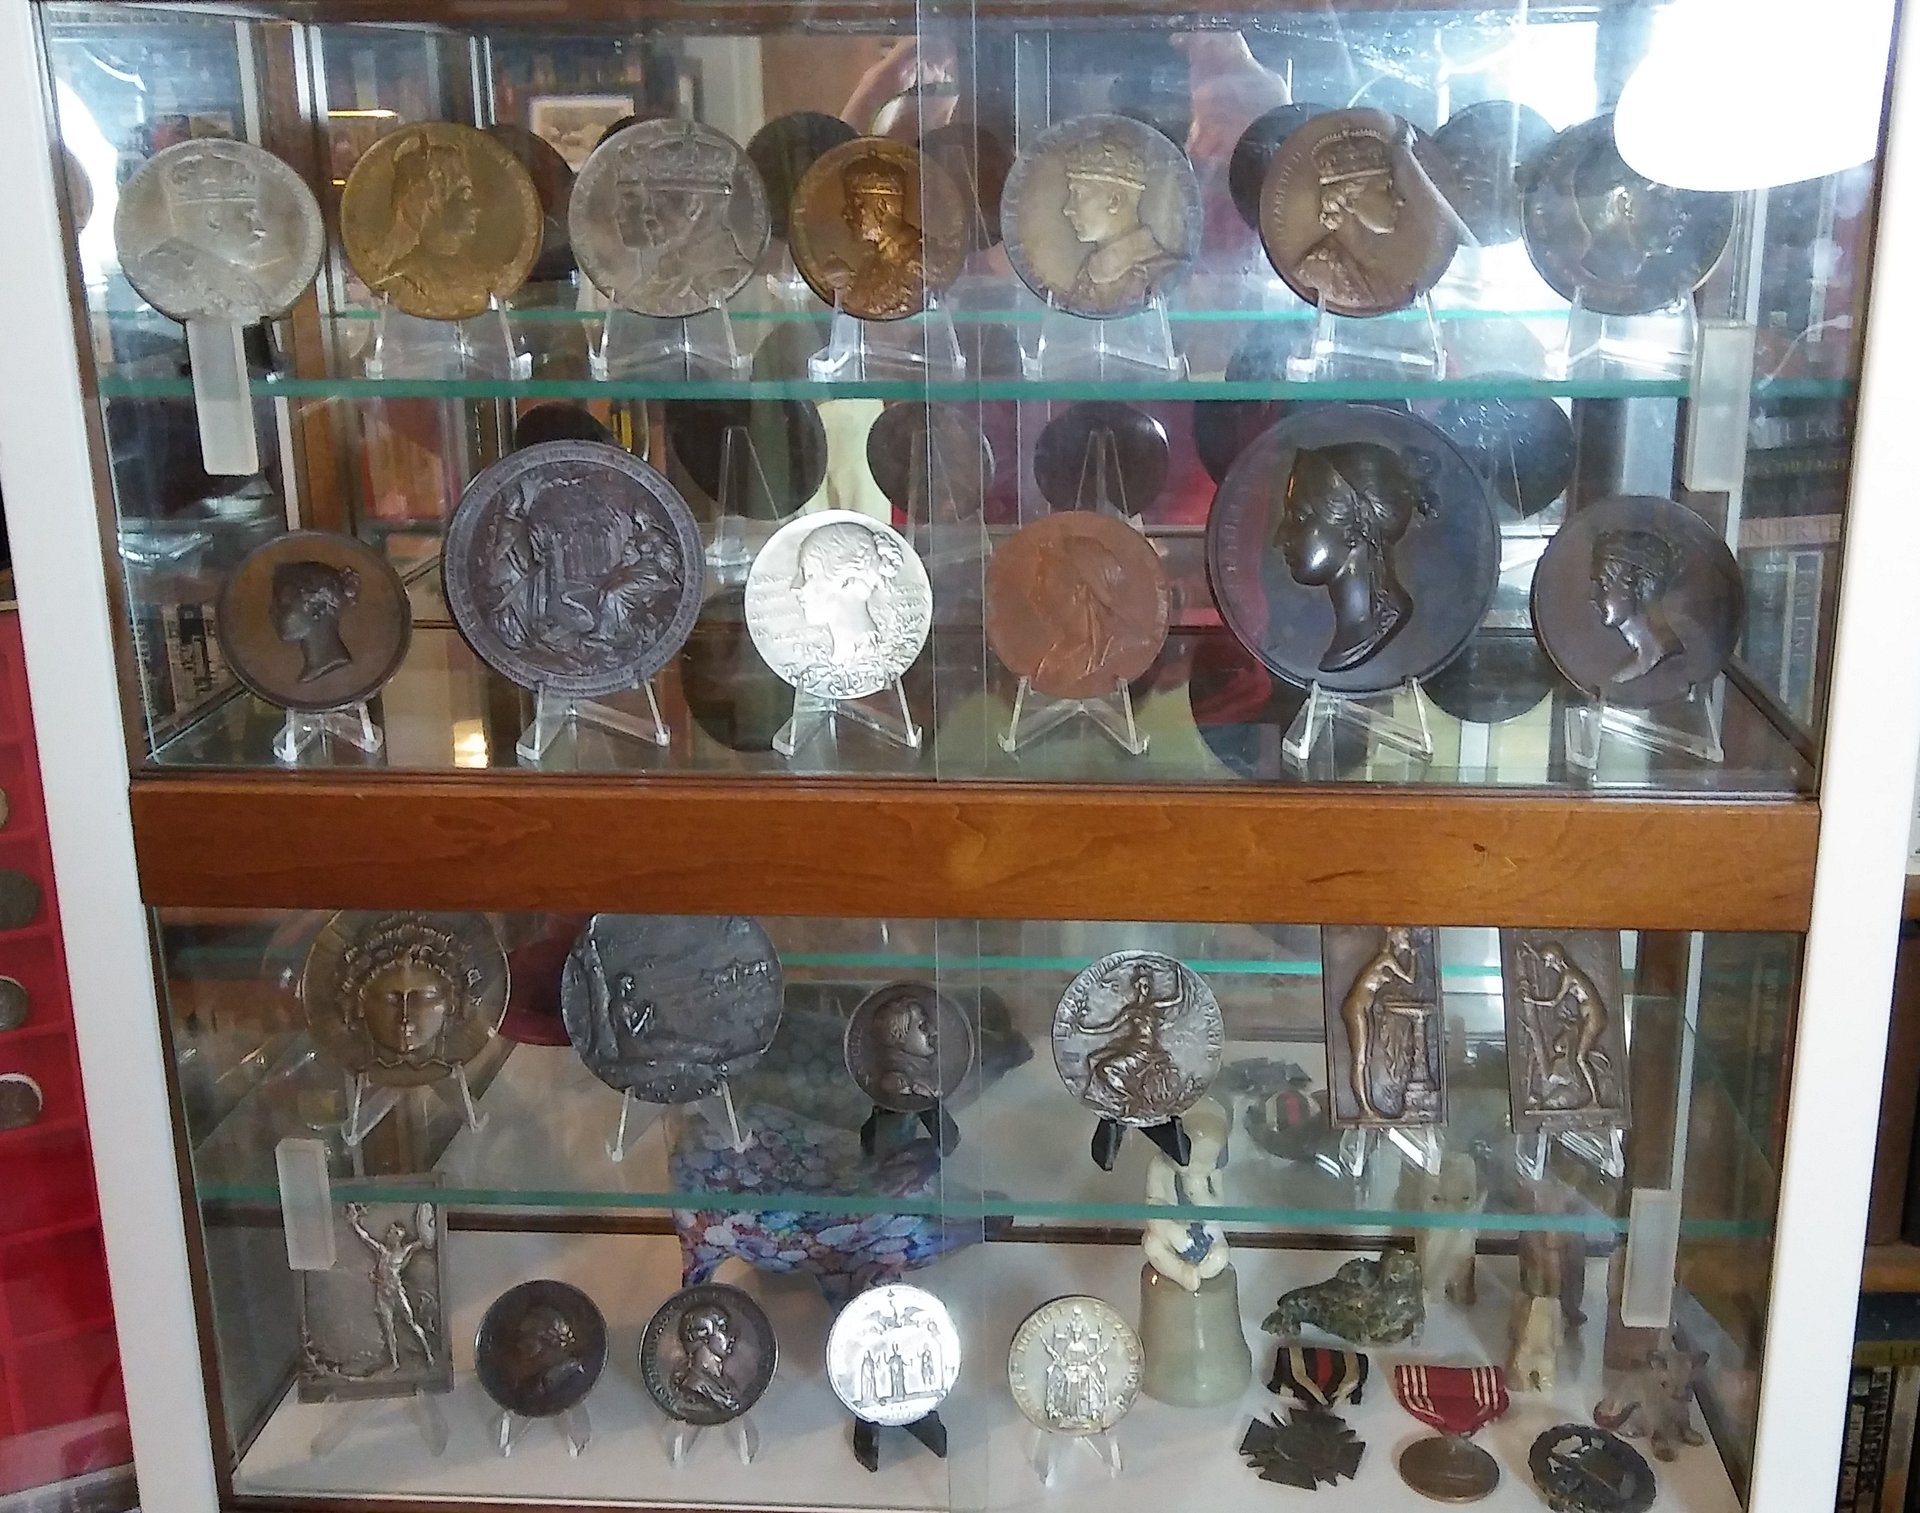 Large medal case - marble table.jpg